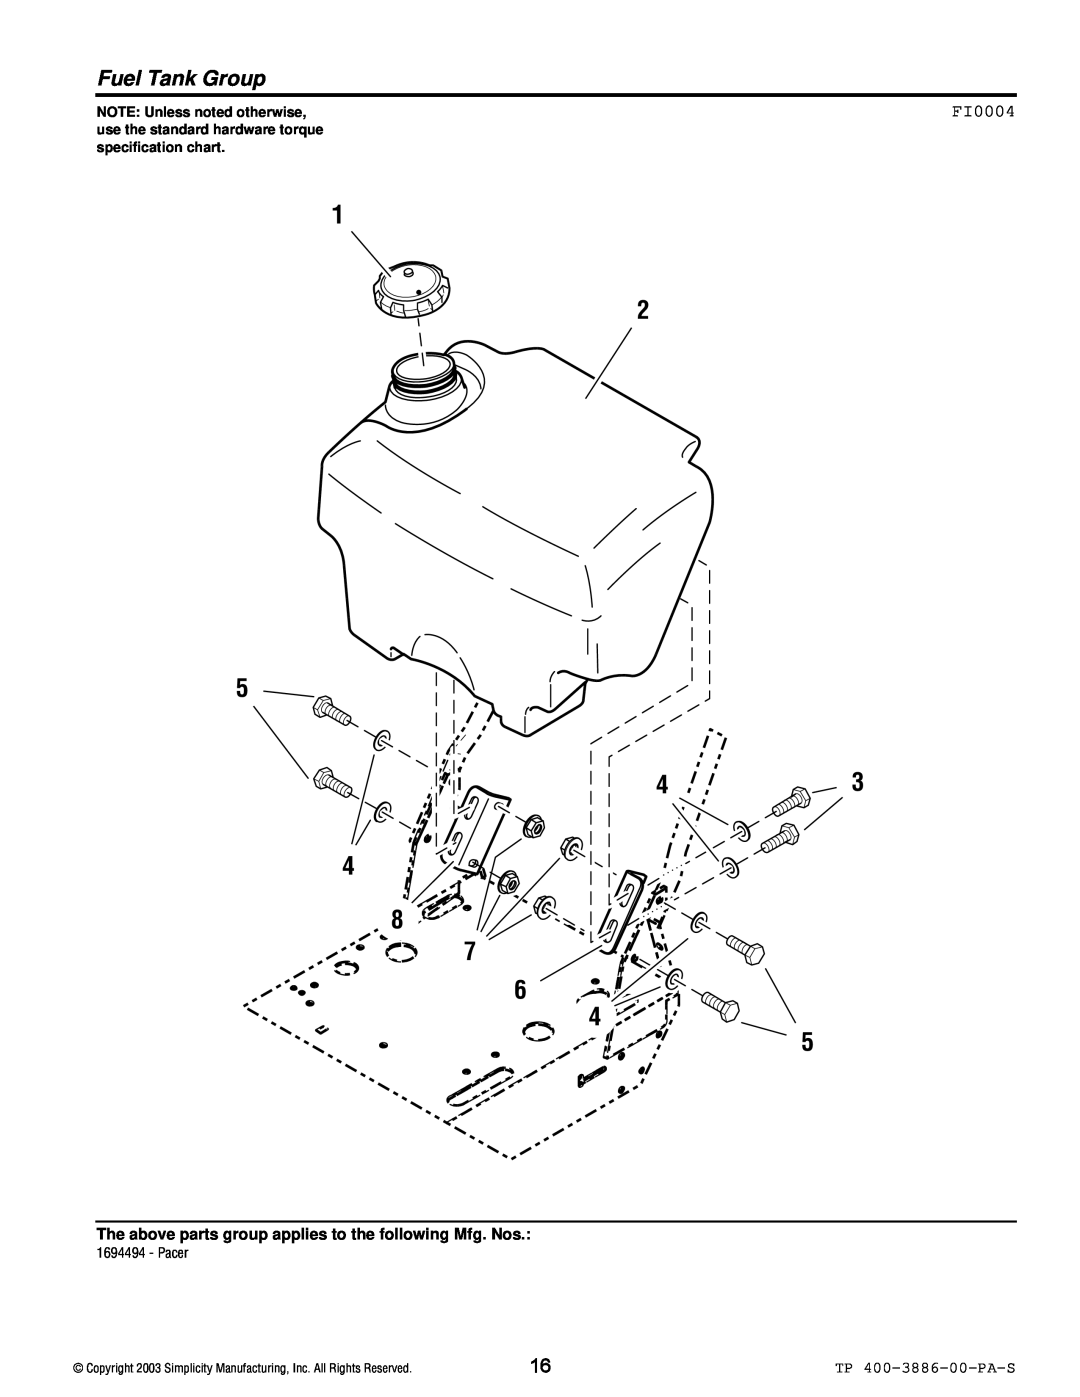 Simplicity Series Transaxle manual 43 4 8, Fuel Tank Group, FI0004, TP 400-3886-00-PA-S, NOTE Unless noted otherwise 